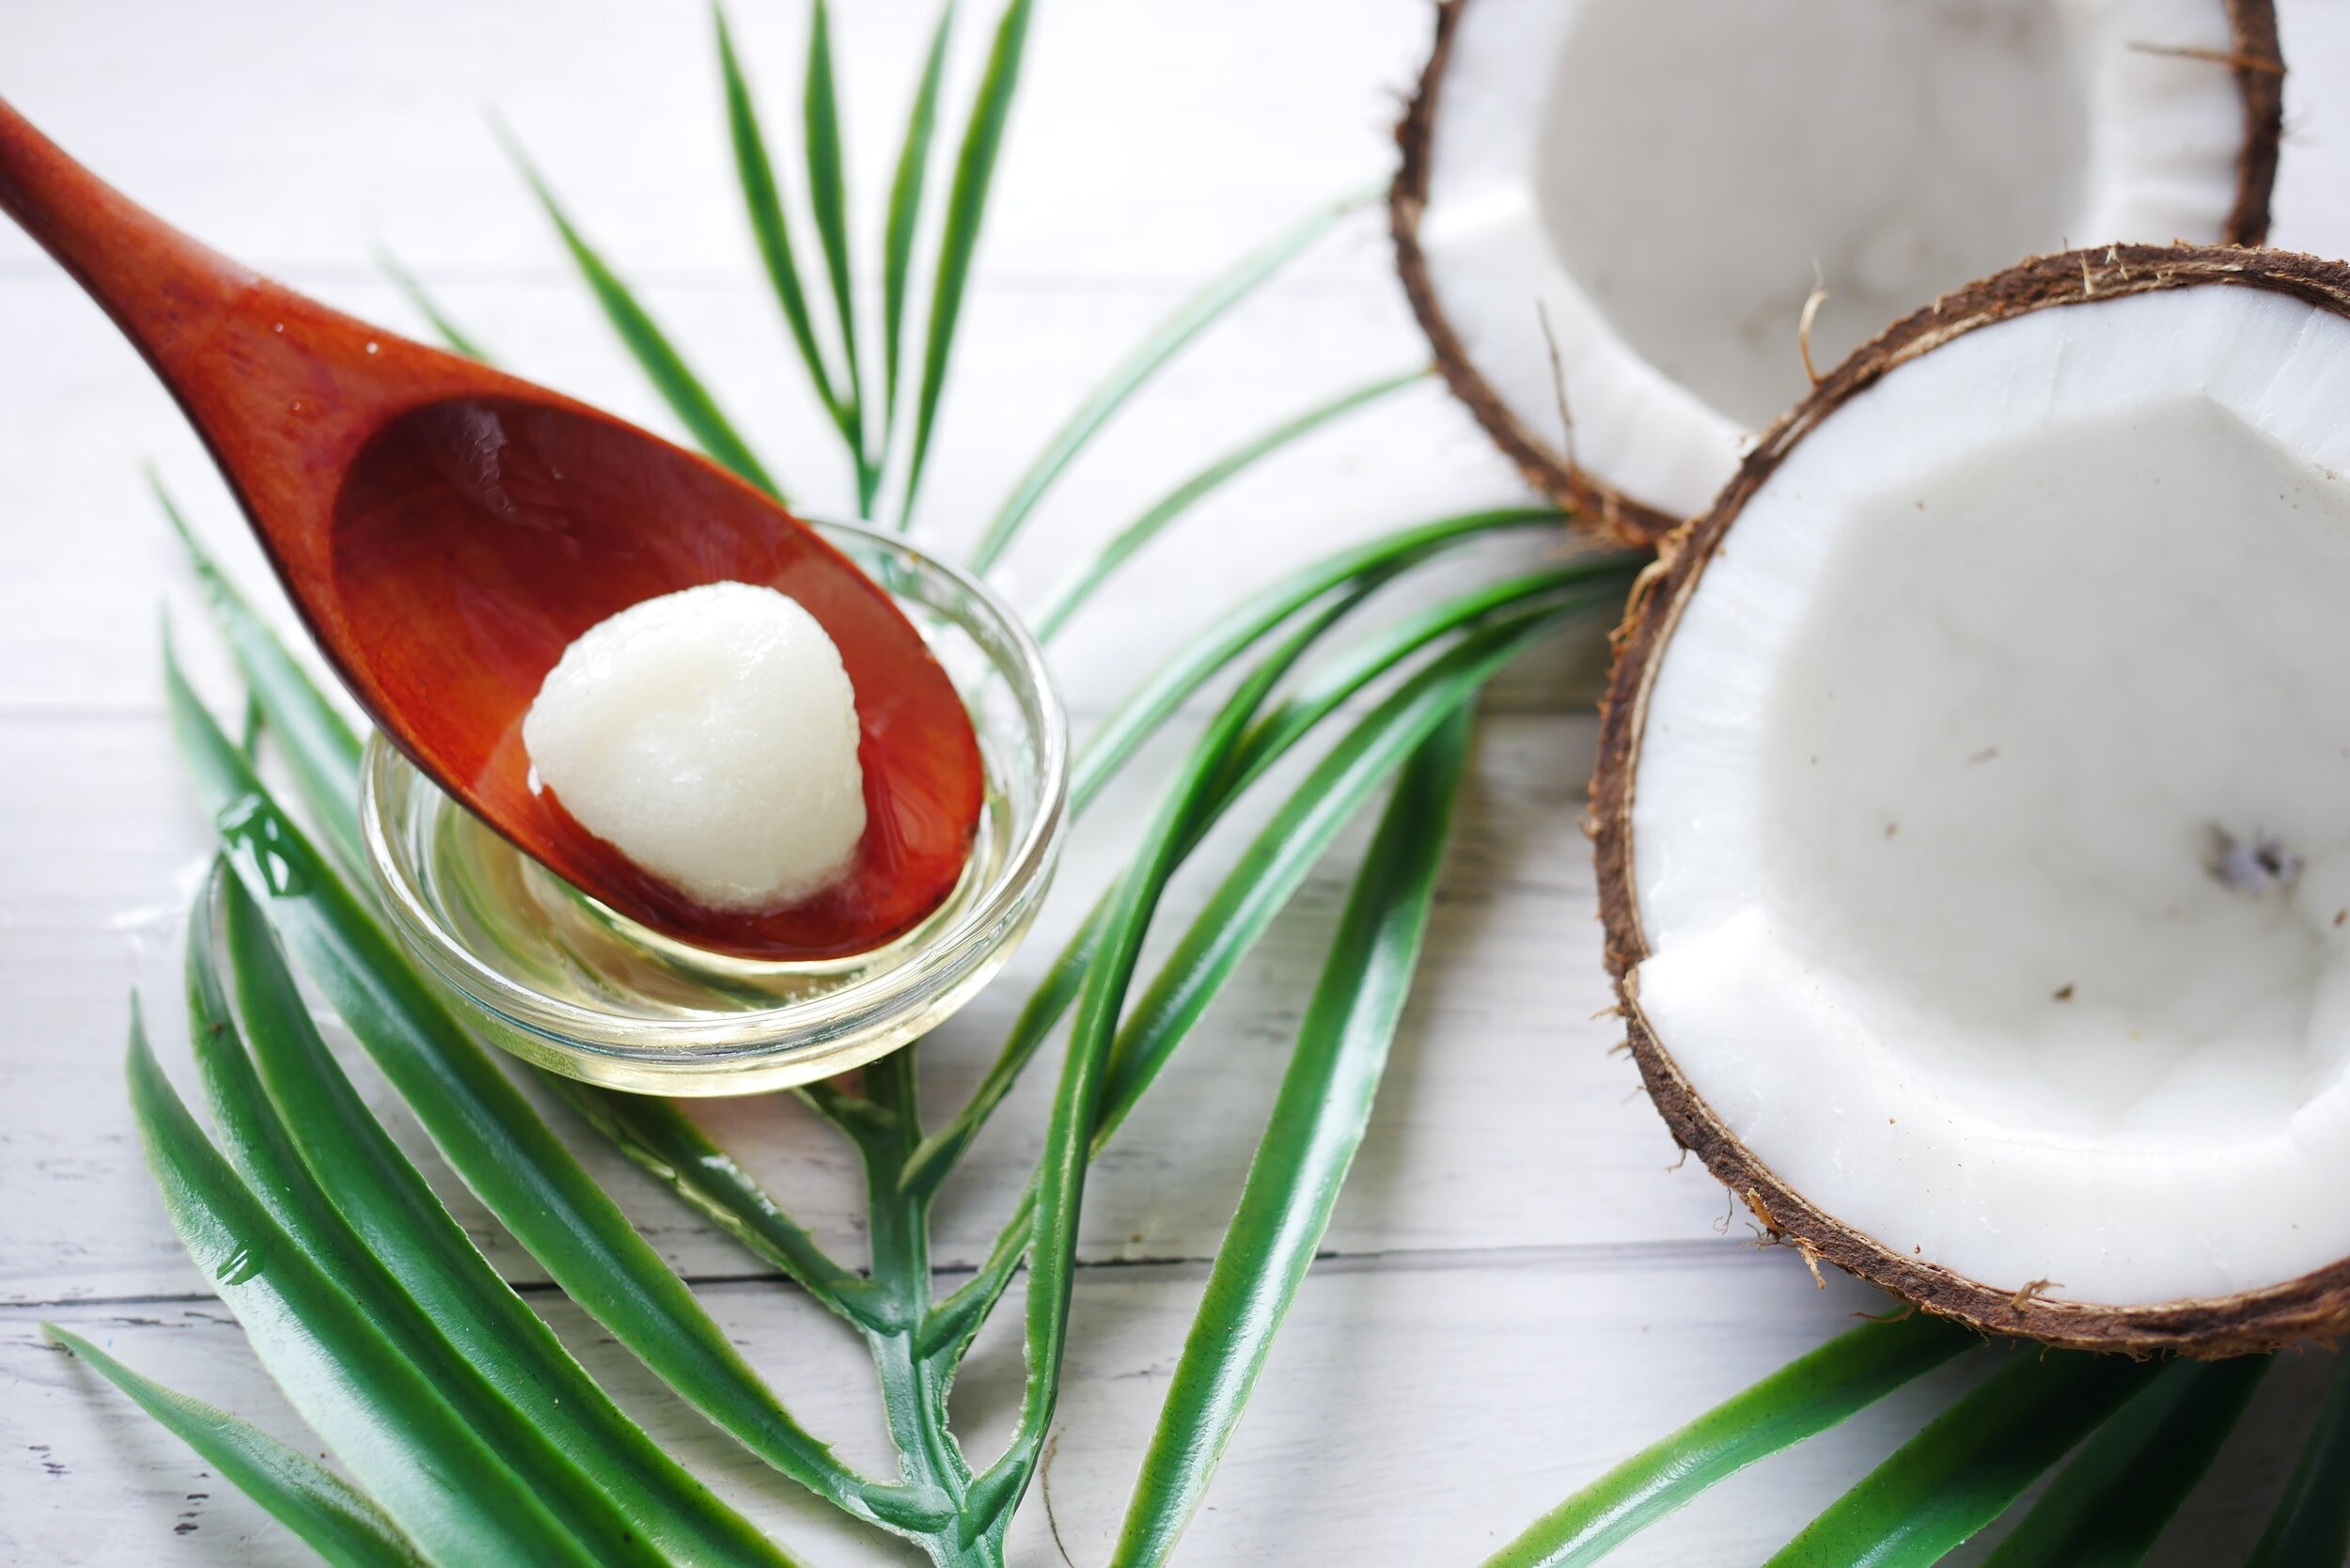 Coconut Oil for Candle Making: Enhancing Your Soy Wax Candles — BAIJI